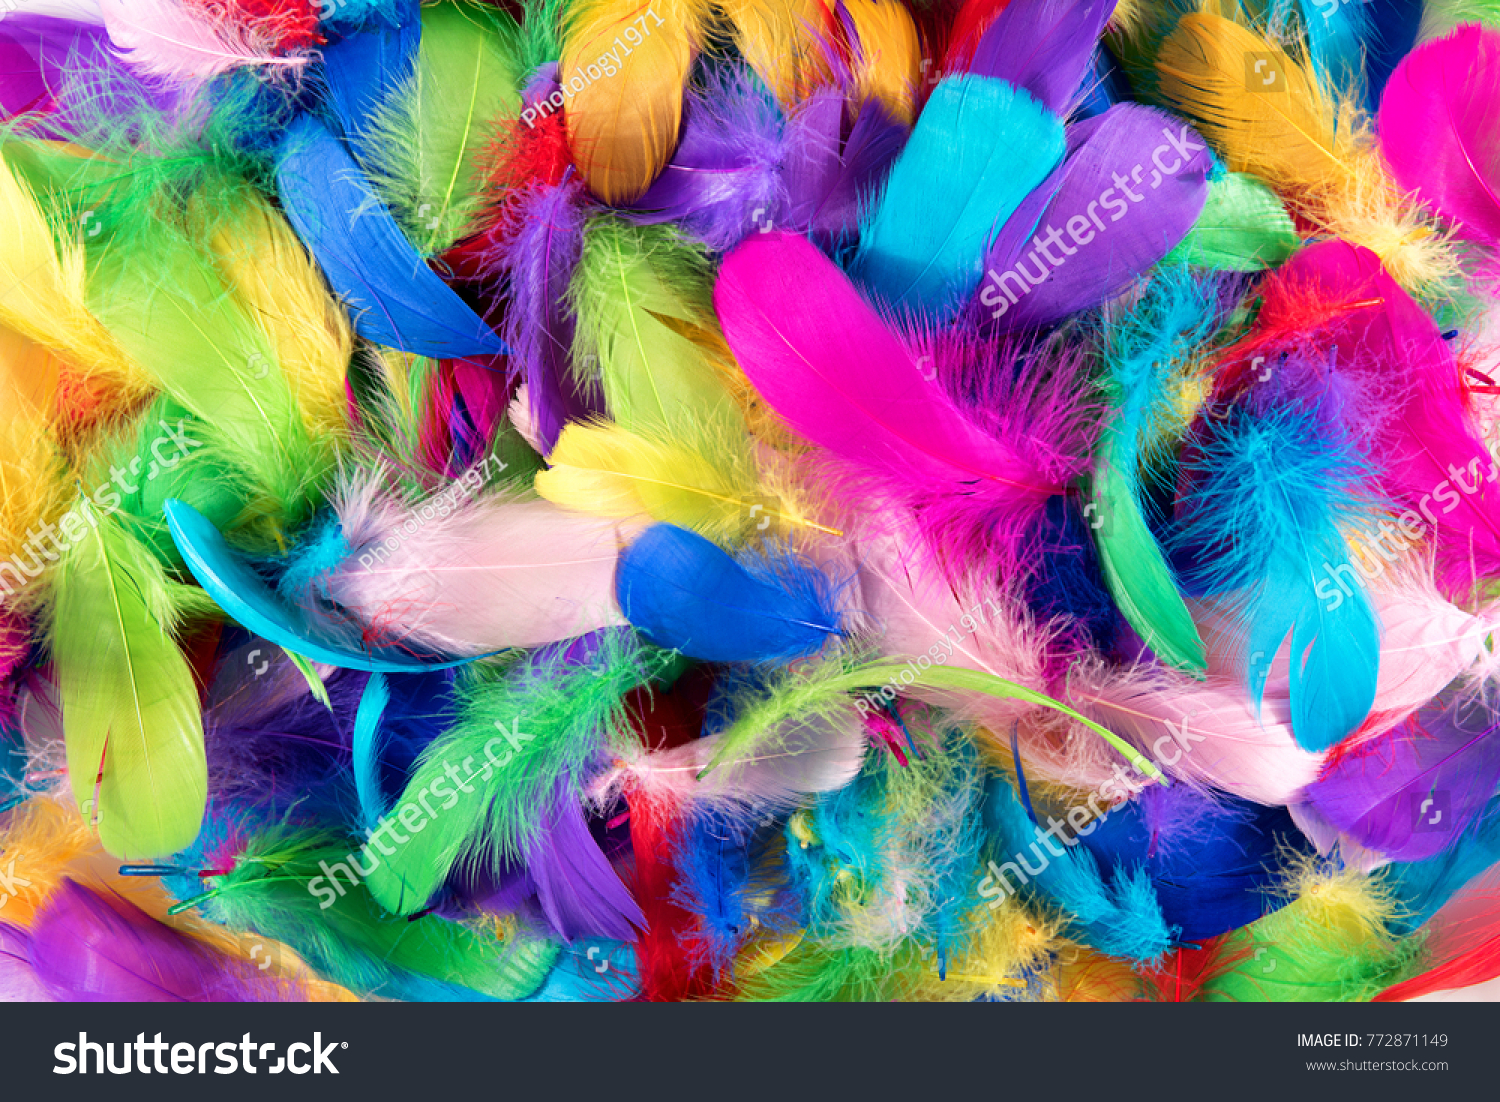 Background texture of brightly colored dyed bird feathers in the colors of the rainbow or spectrum in a random pile viewed from above in a full frame view #772871149